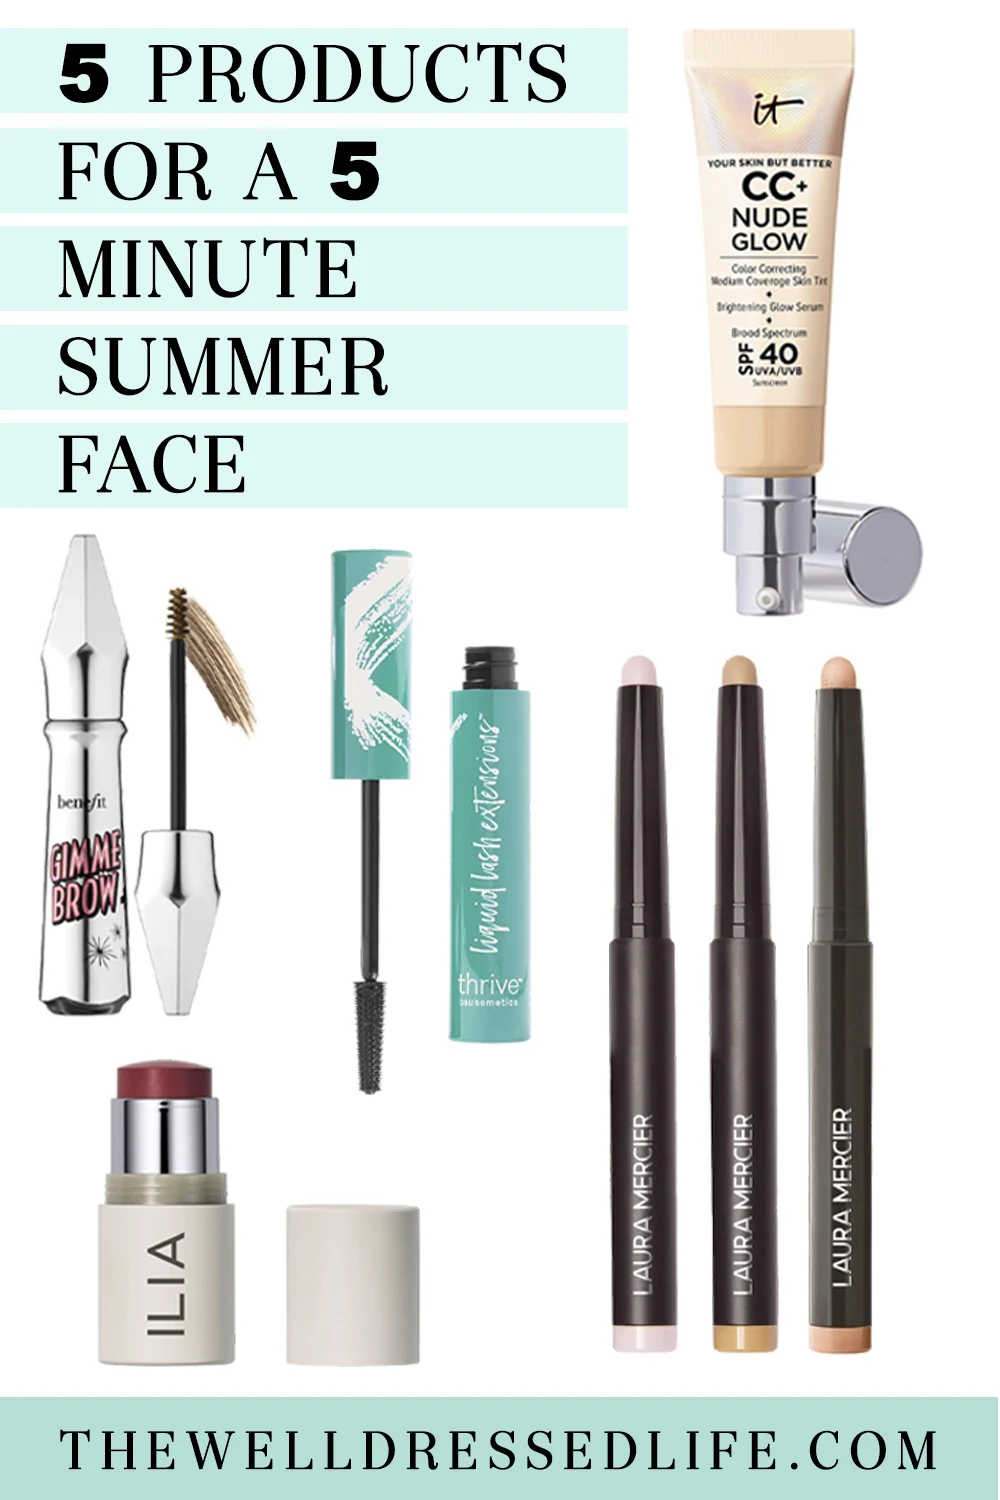 5 Products for a 5 Minute Face